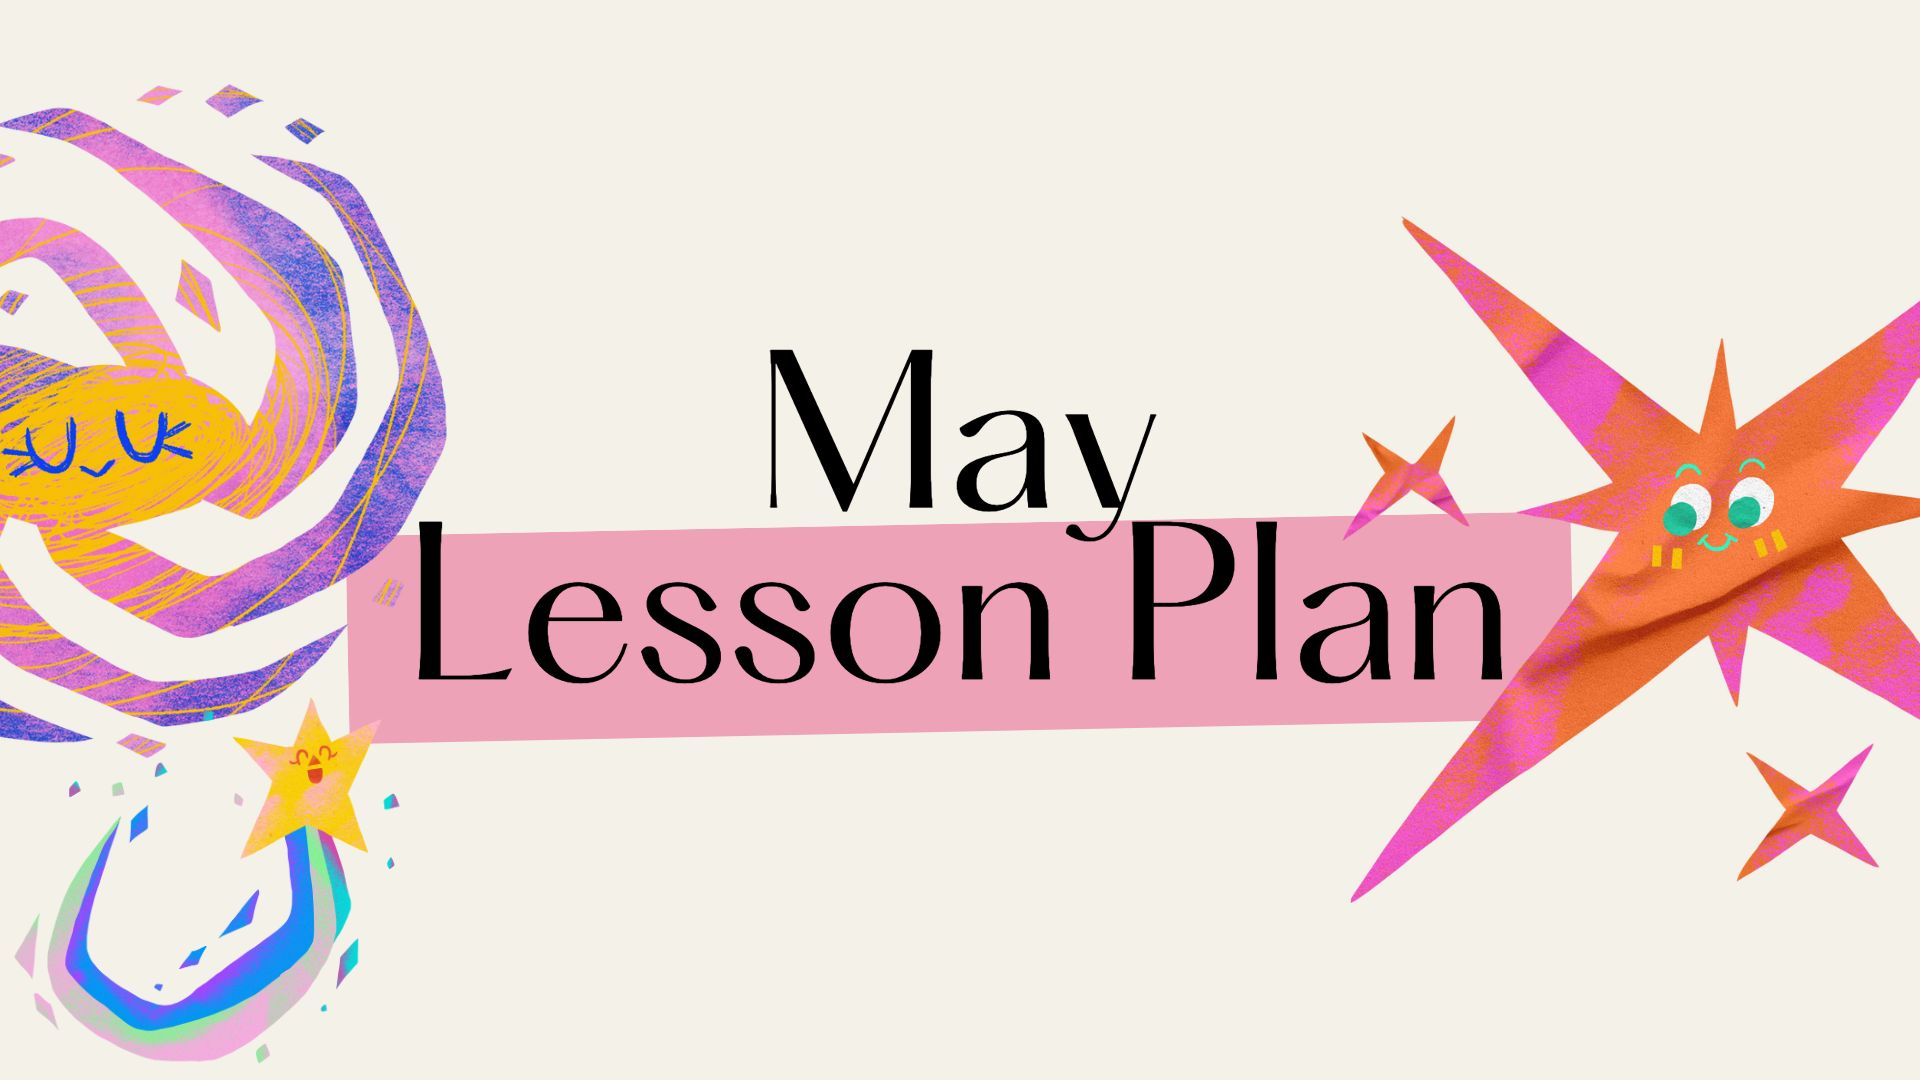 colourful Sun and two Stars with happy faces next to the text "May Lesson Plan"